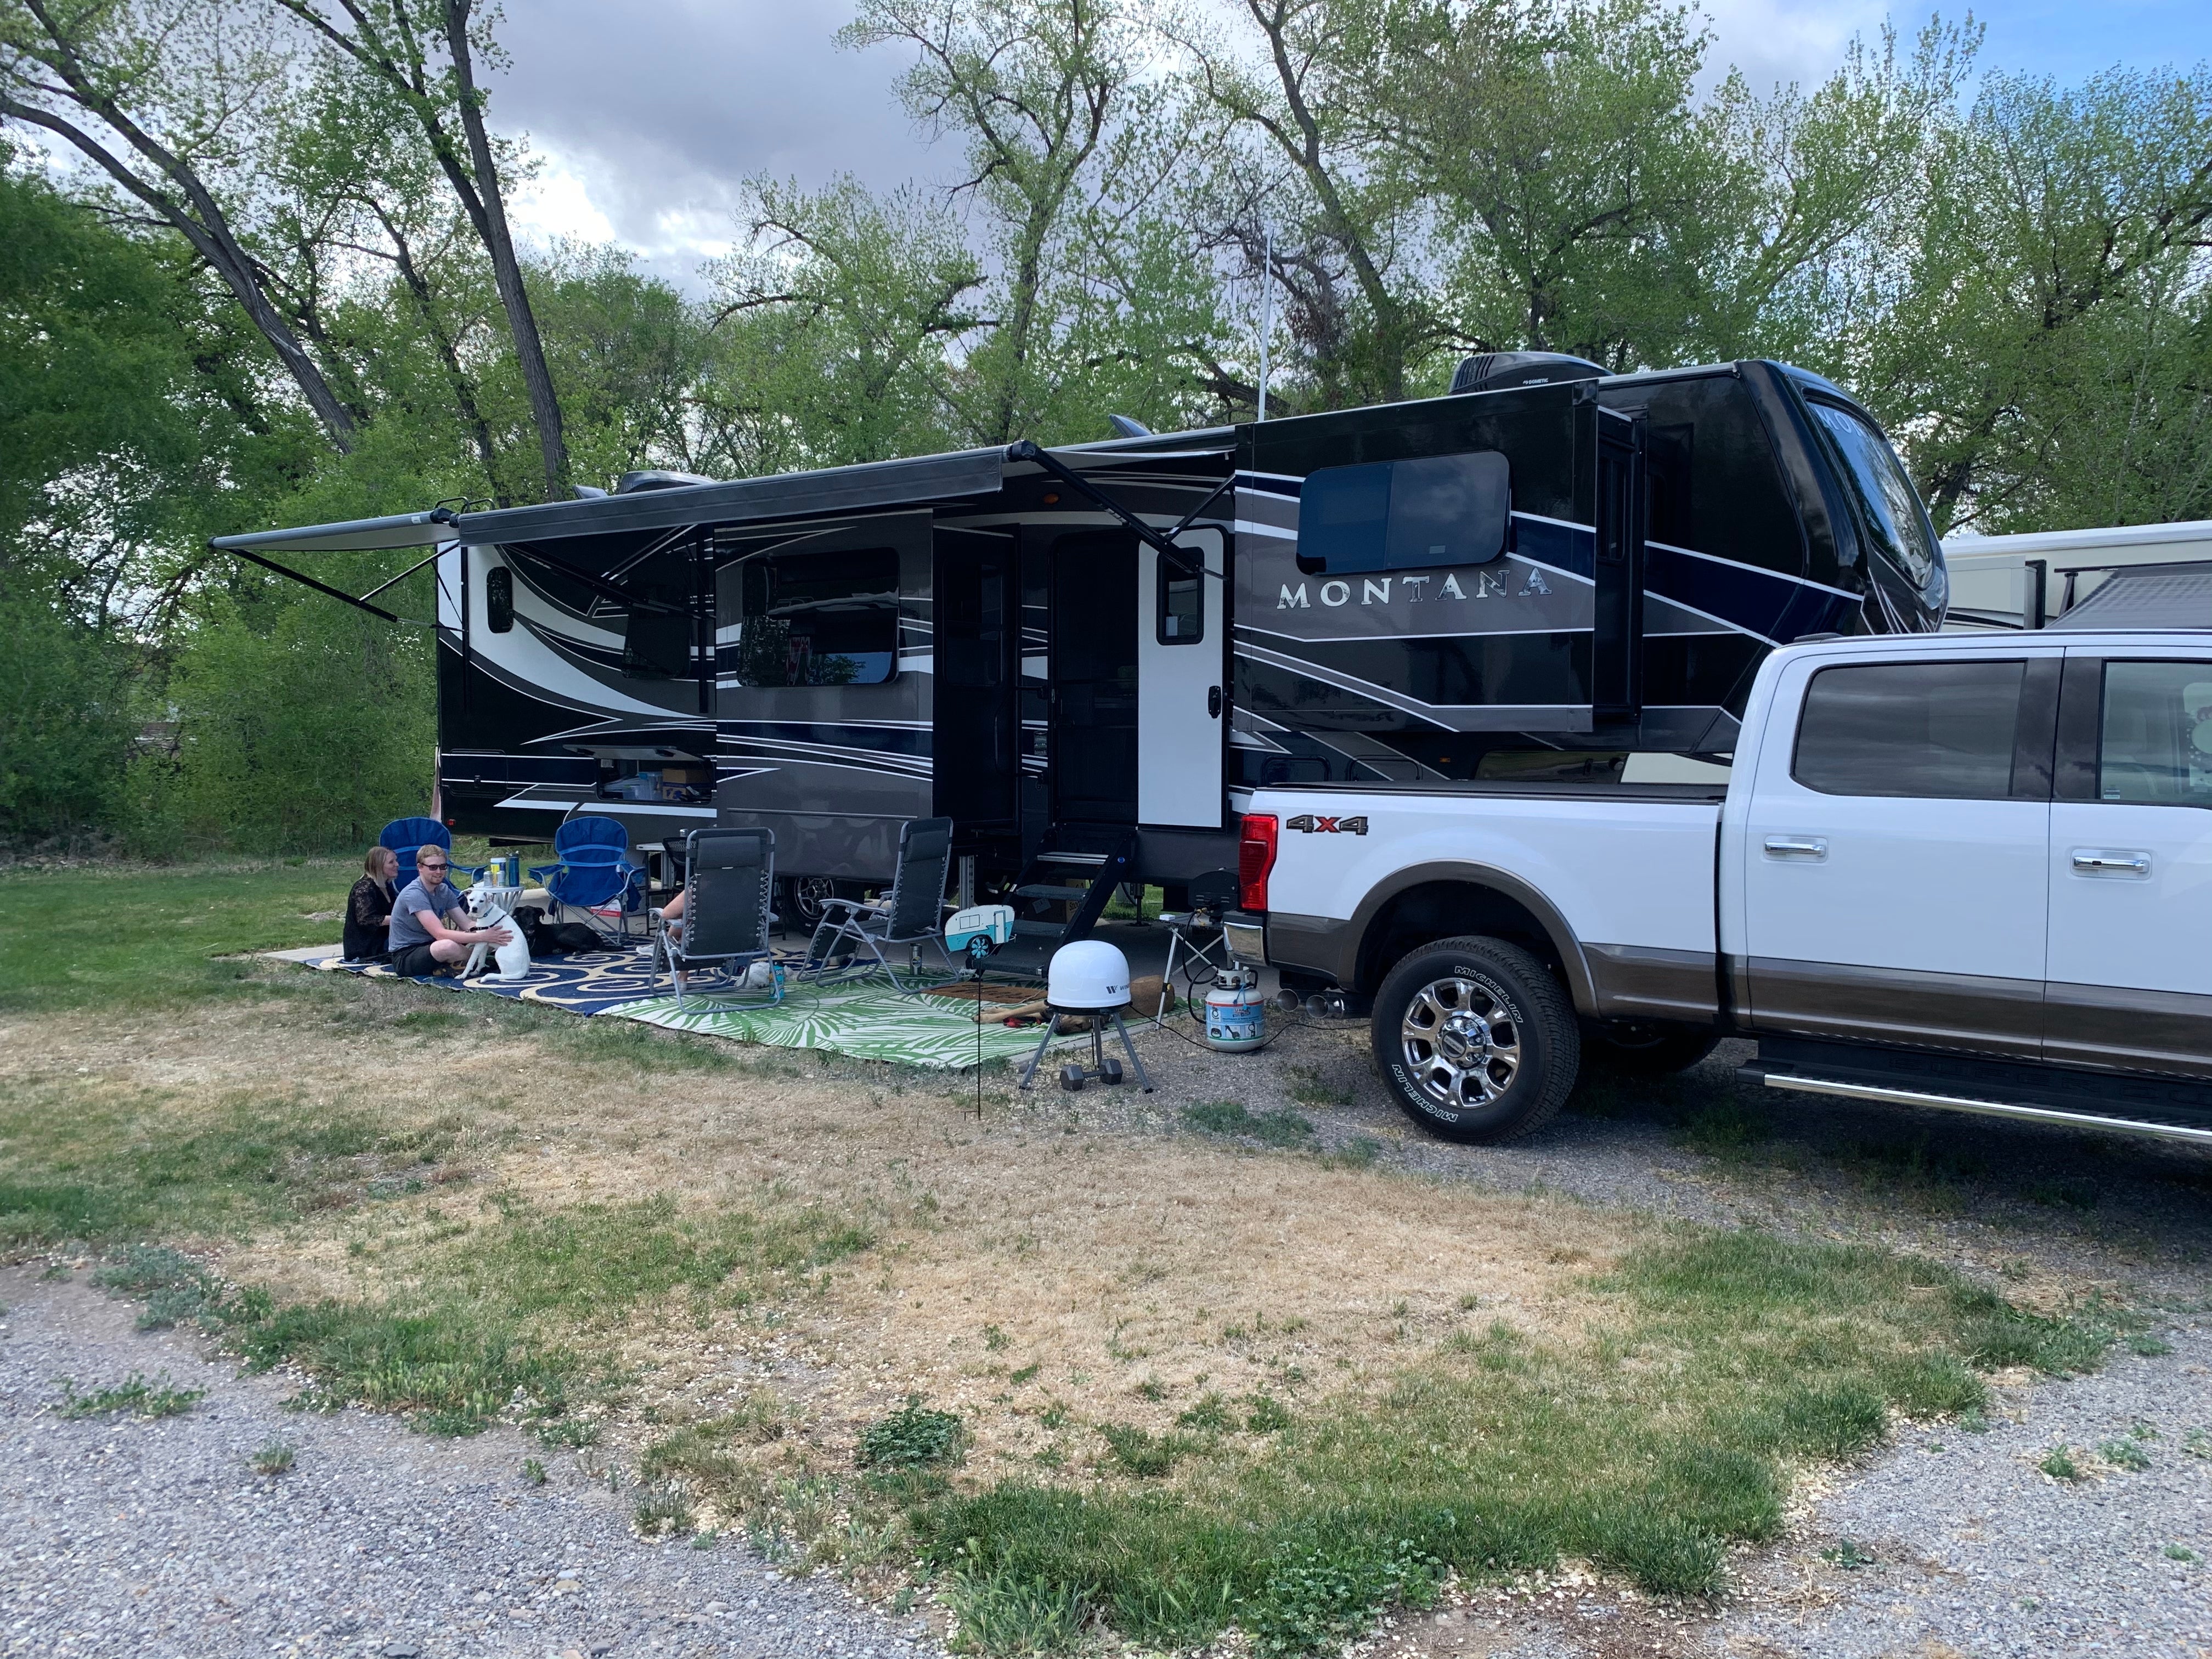 Camper submitted image from Uncompaghre River Resort - 1